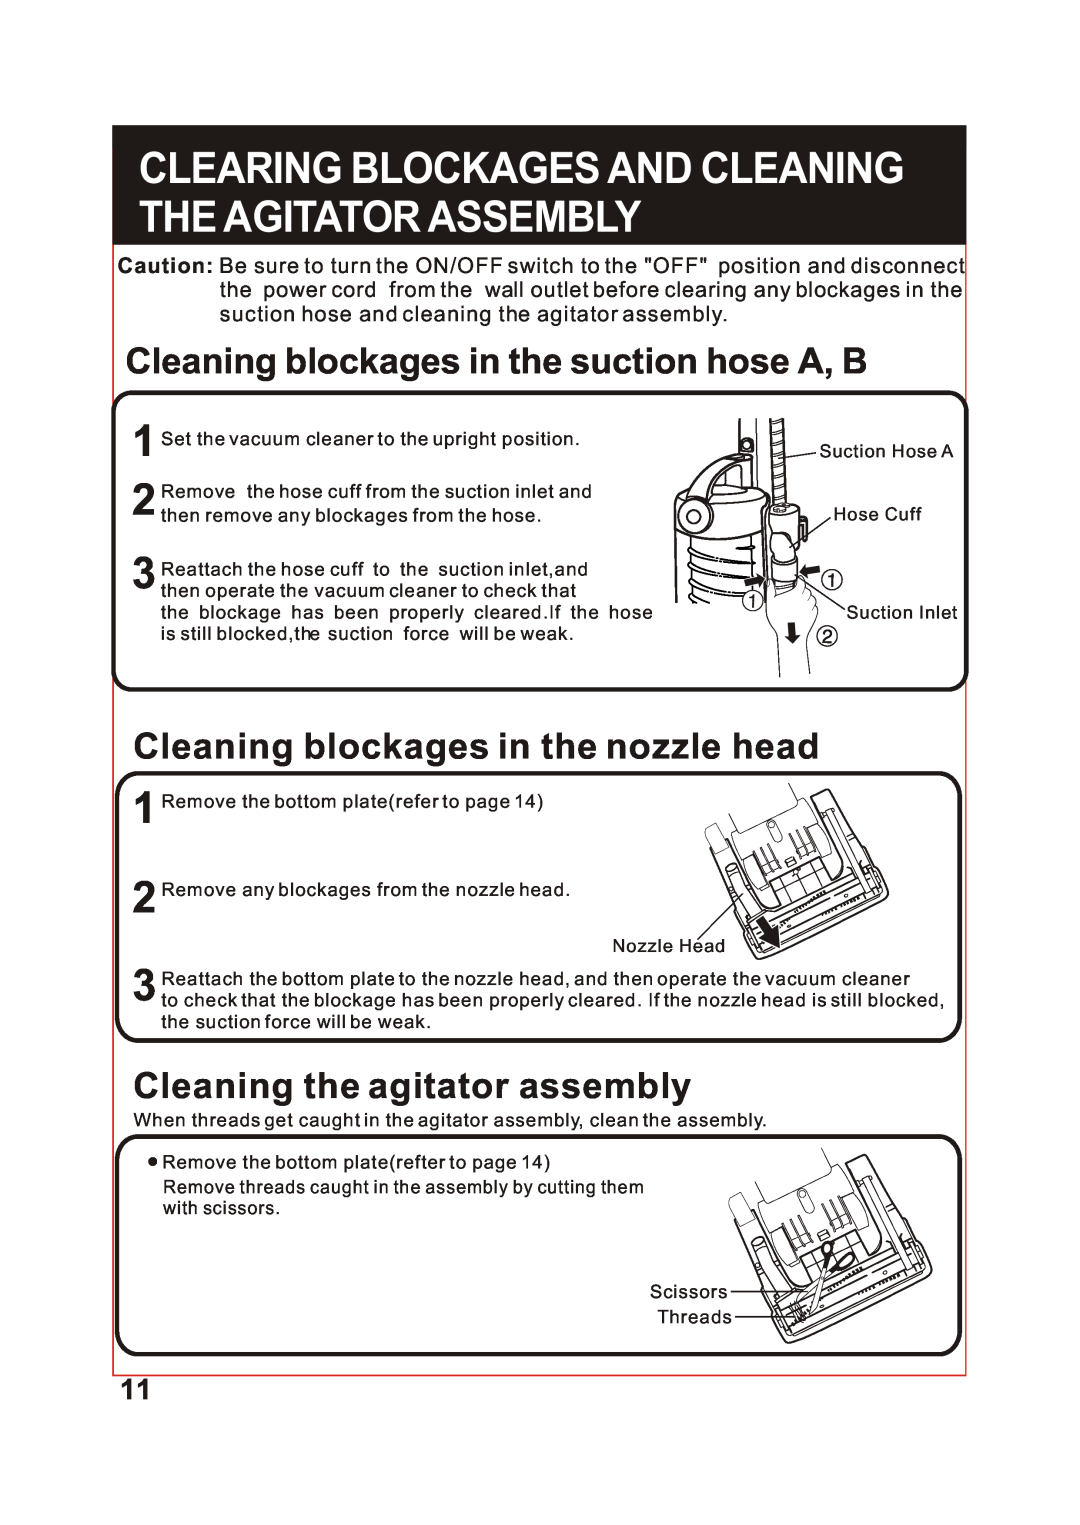 Fantom Vacuum FM741 instruction manual Cleaning blockages in the suction hose A, B, Cleaning blockages in the nozzle head 